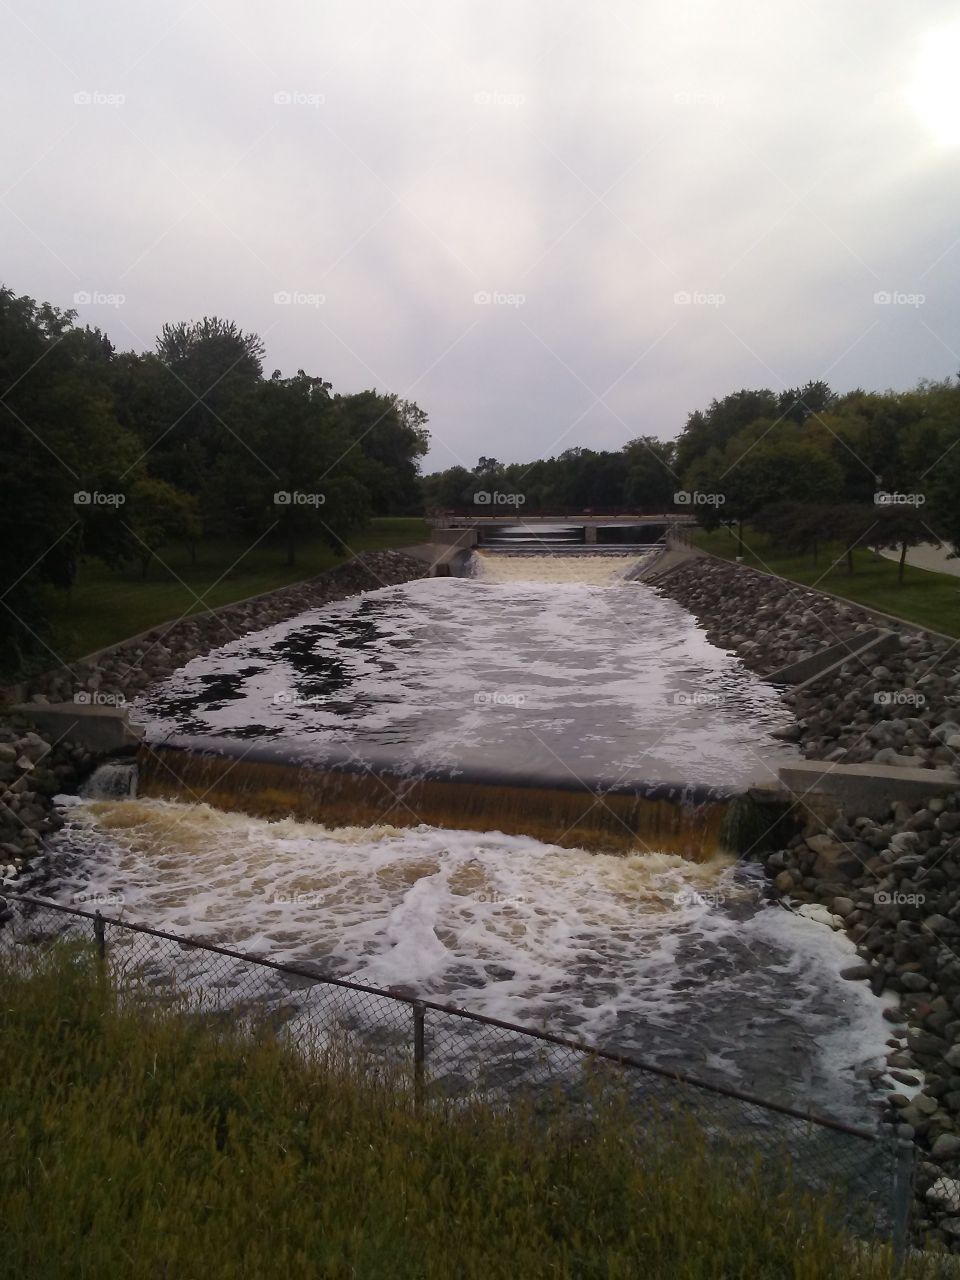 Manitowoc River rushing through the dam and falls in Chilton, Wisconsin.